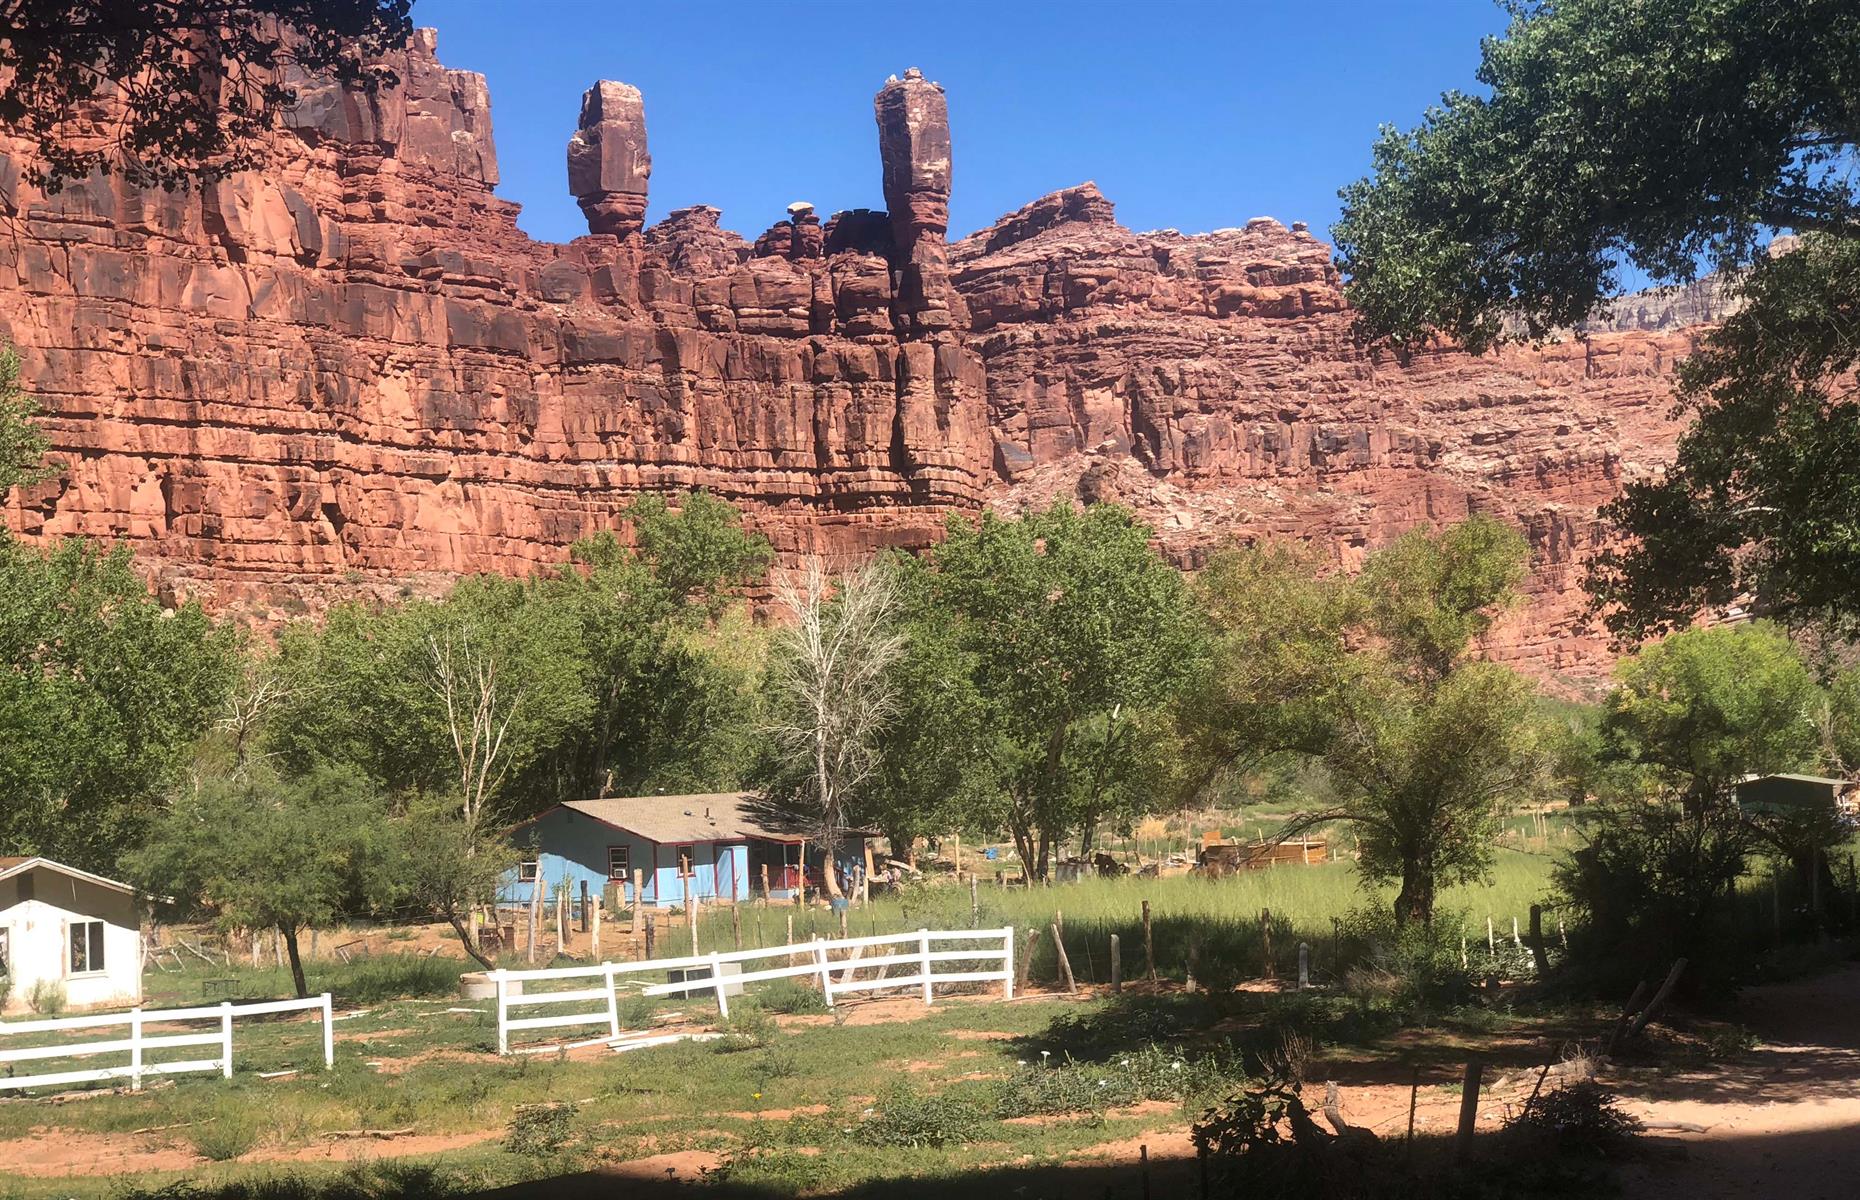 <p>Often <a href="https://www.bbc.com/travel/article/20180222-the-tiny-village-hidden-inside-the-grand-canyon">referred to </a>as the most remote community in the lower 48 states, the secluded community of Supai is located within the Grand Canyon in an area known as Havasu Canyon. Only accessible by helicopter, mule or on foot, it sits eight miles from the nearest road and feels like extreme living at the end of the Earth. </p>